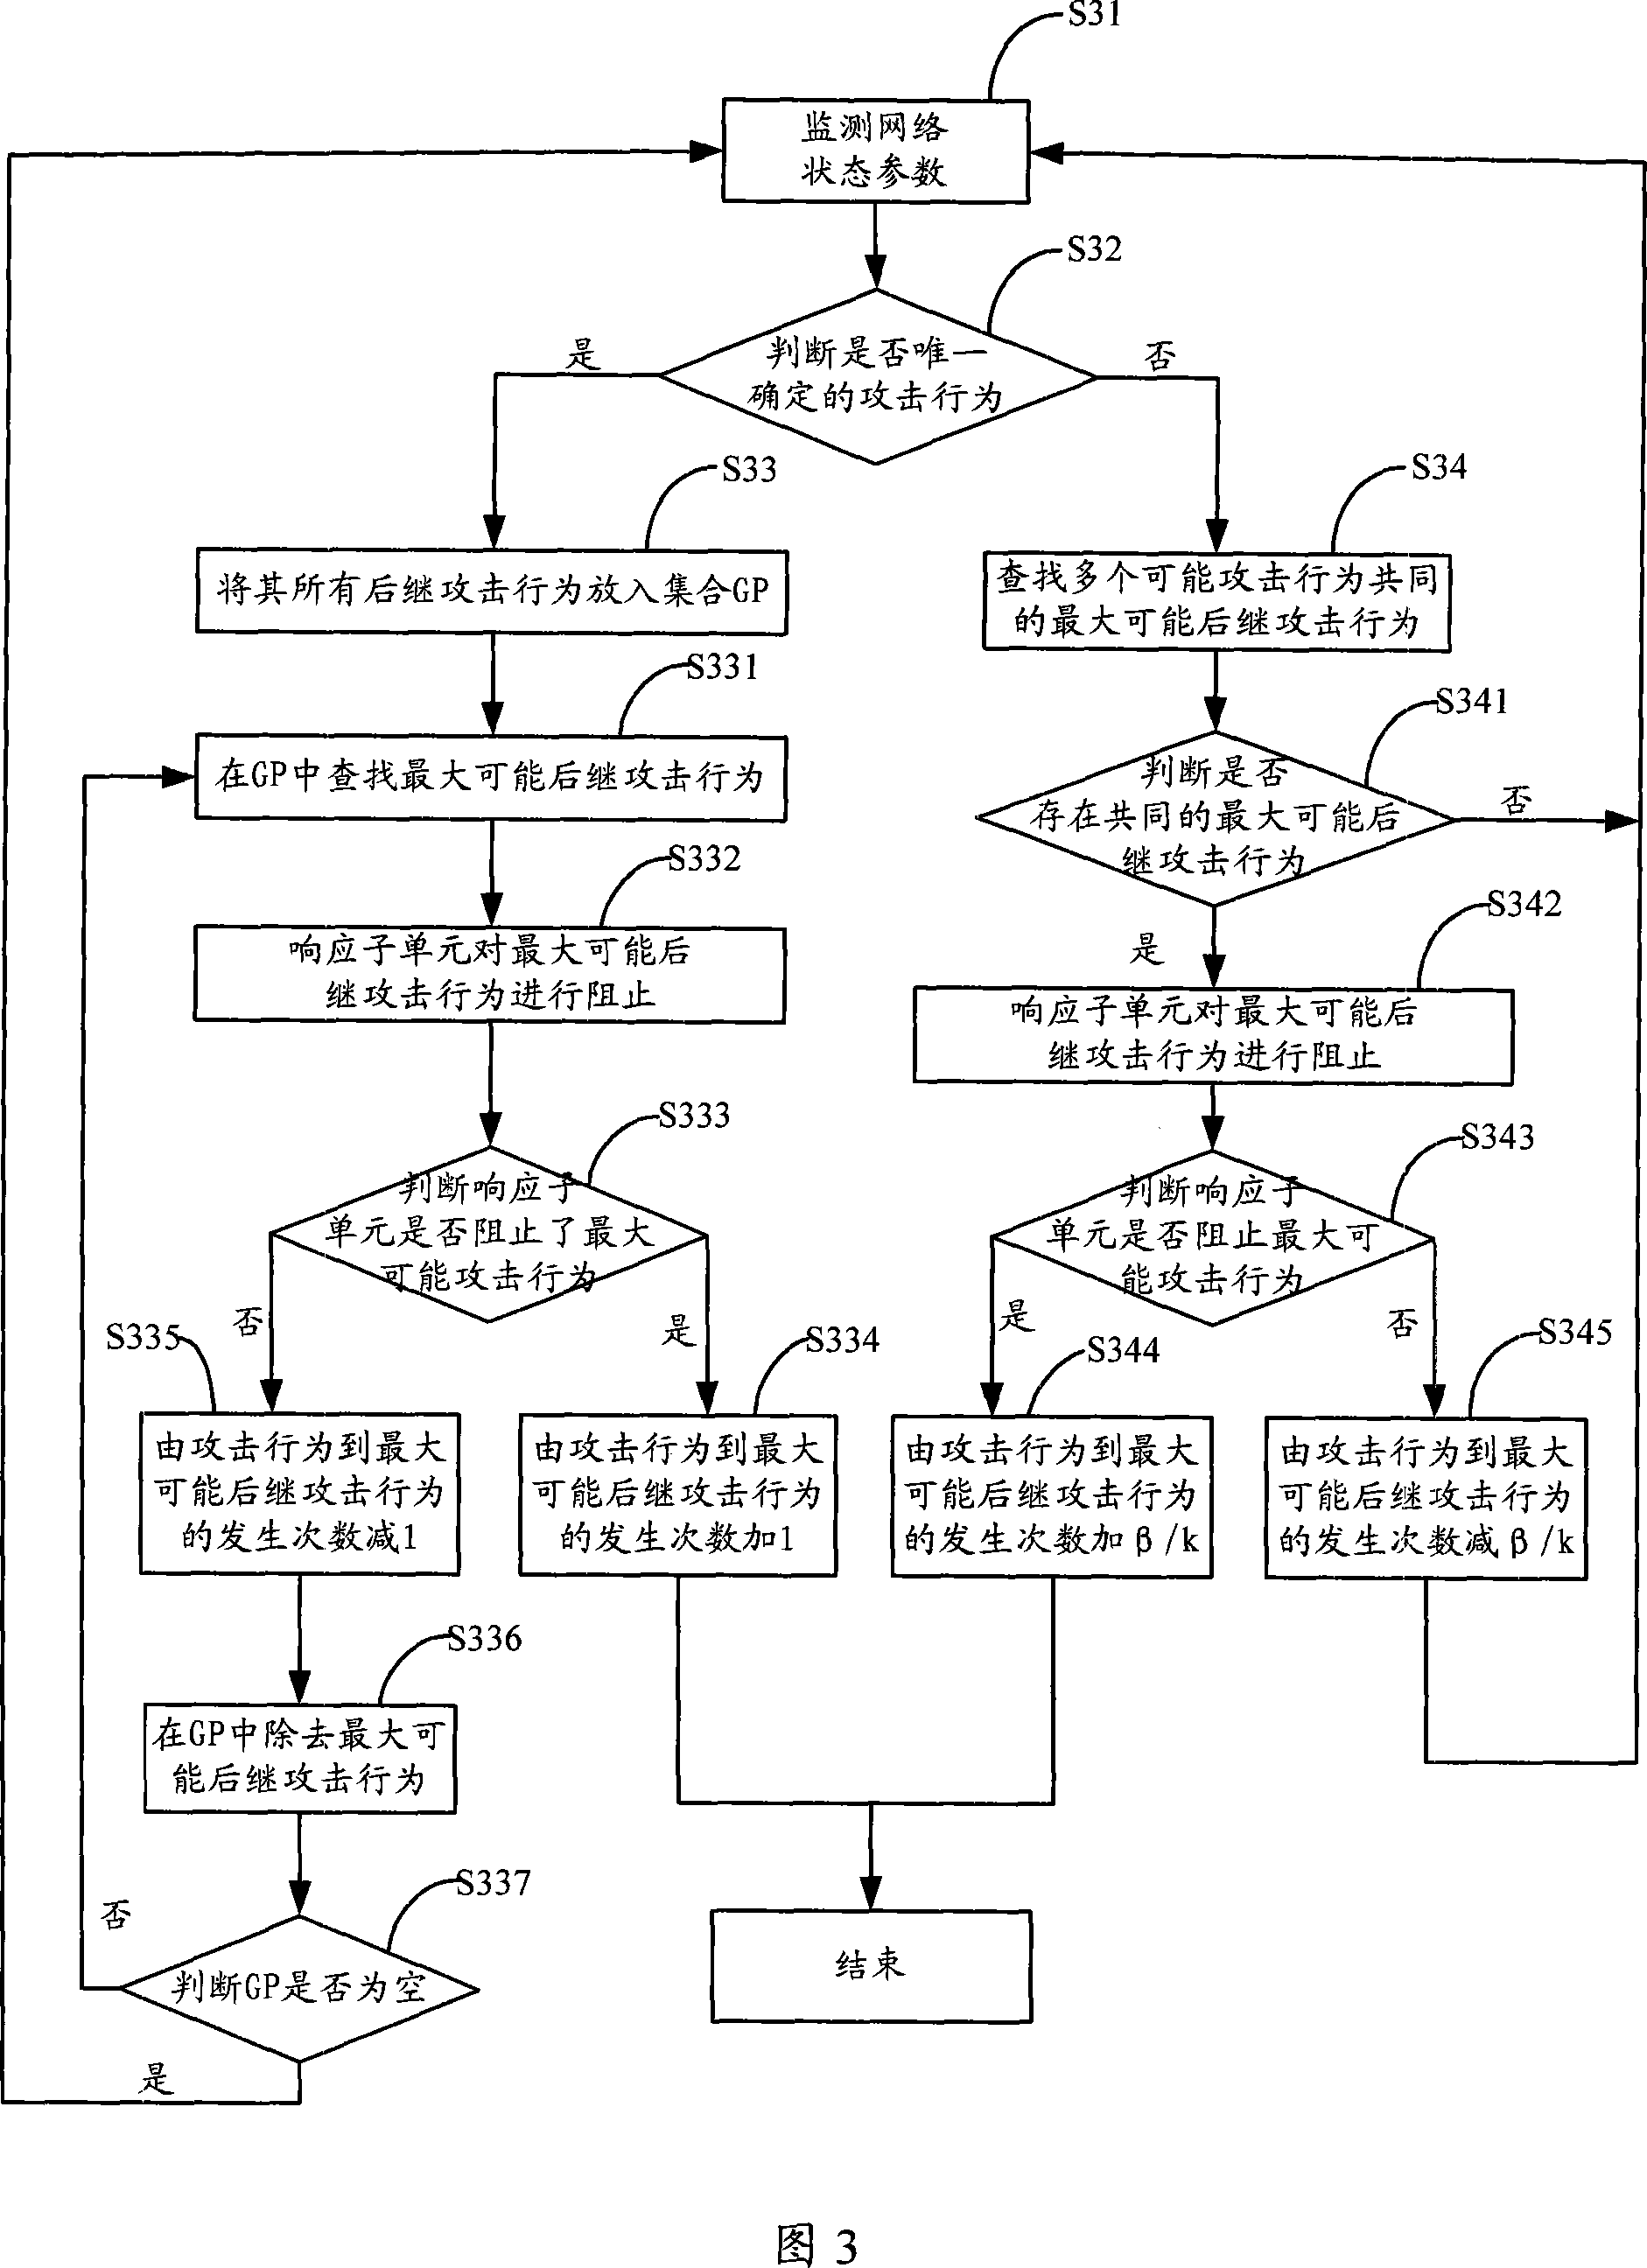 Method and apparatus for predicting network attack behaviour